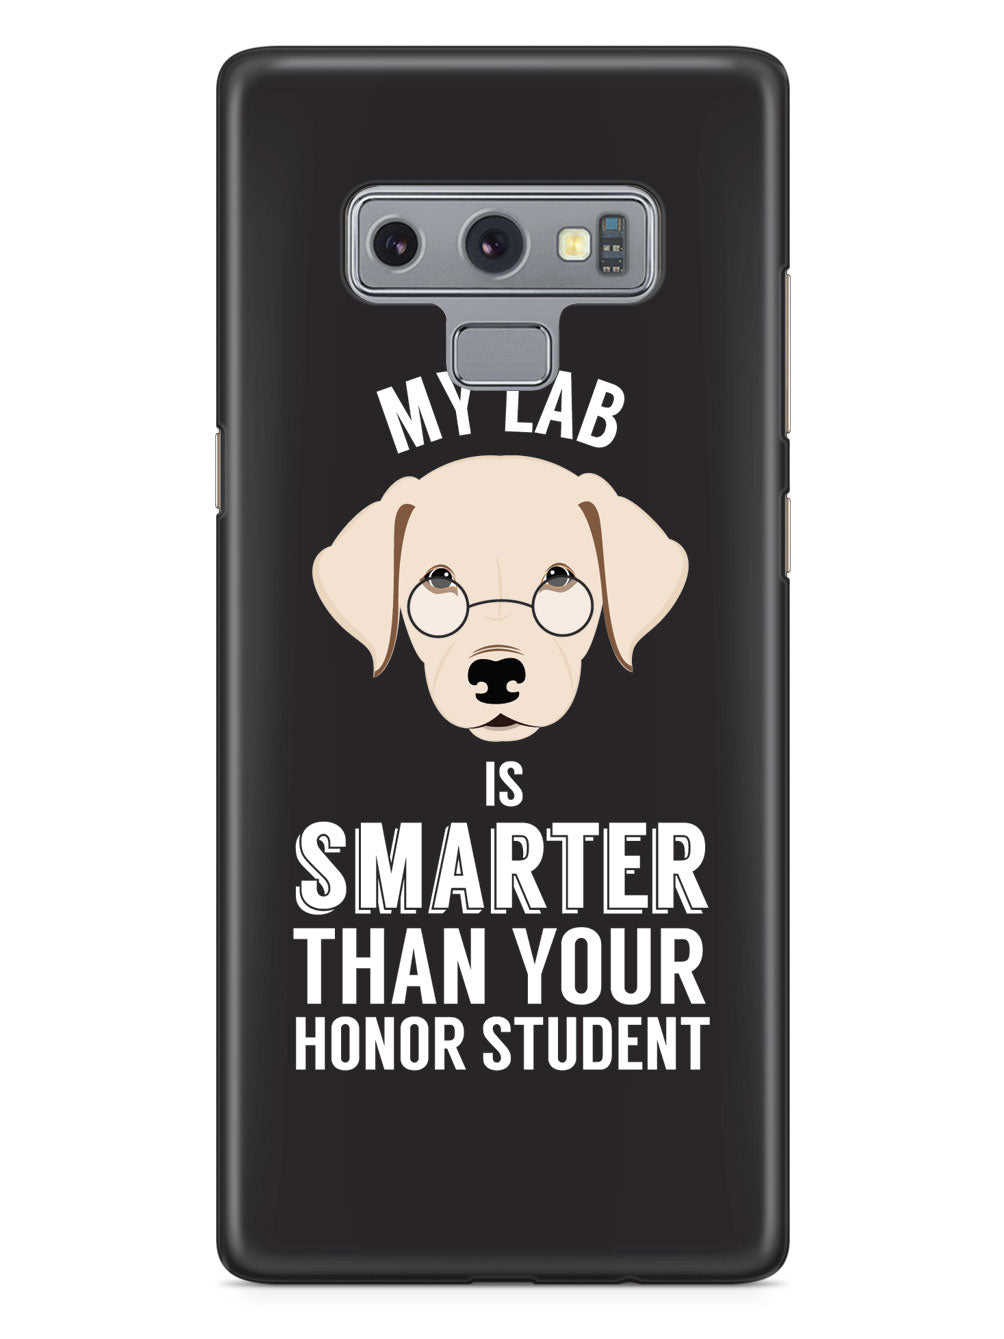 Smarter Than Your Honor Student - Lab Case